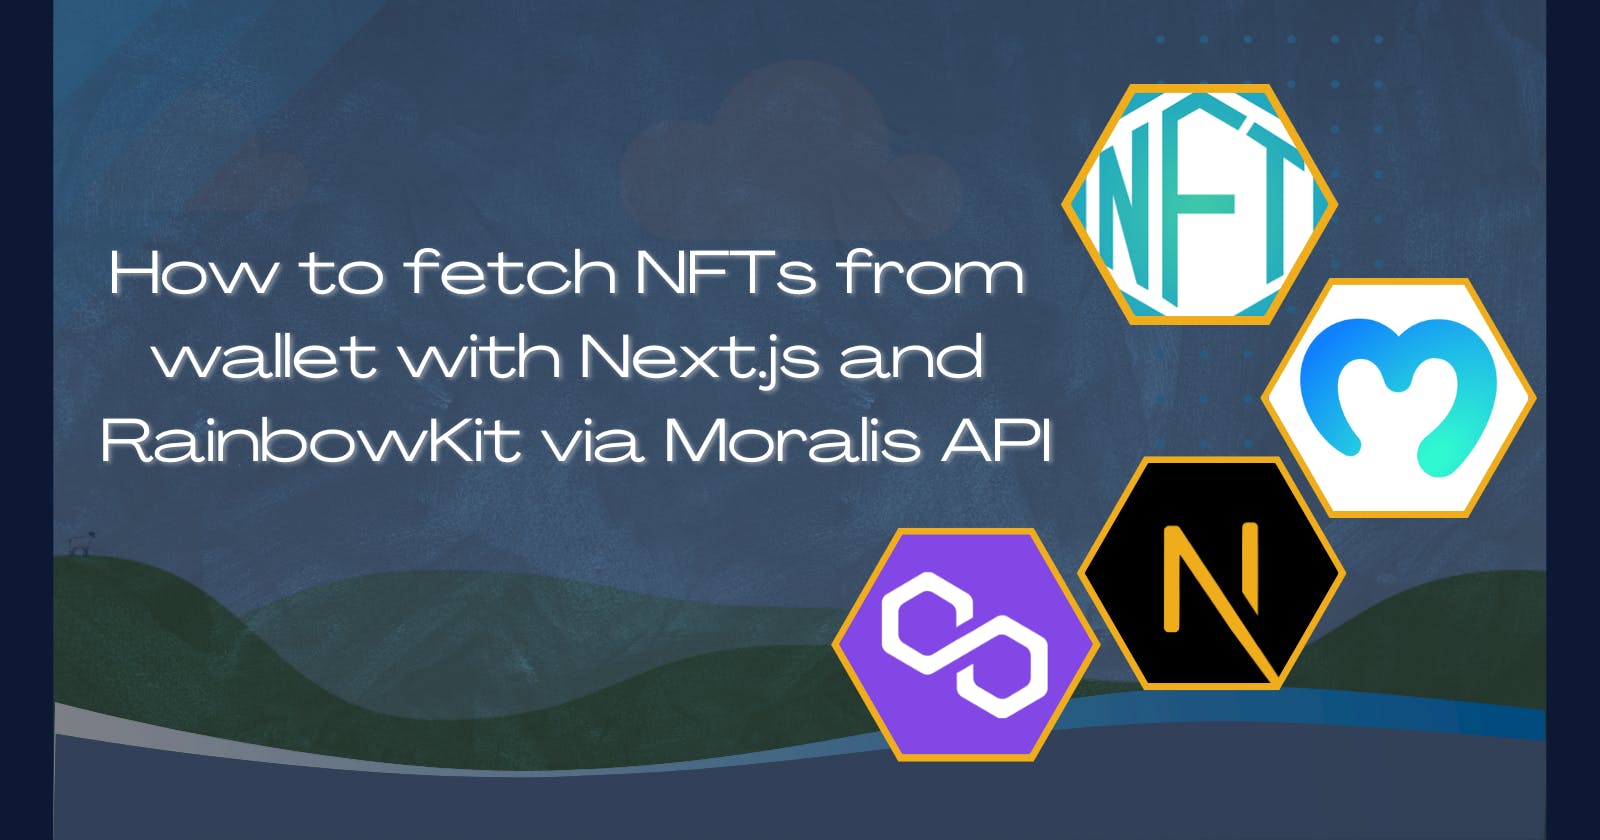 How to fetch NFTs from wallet with Next.js and RainbowKit via Moralis API